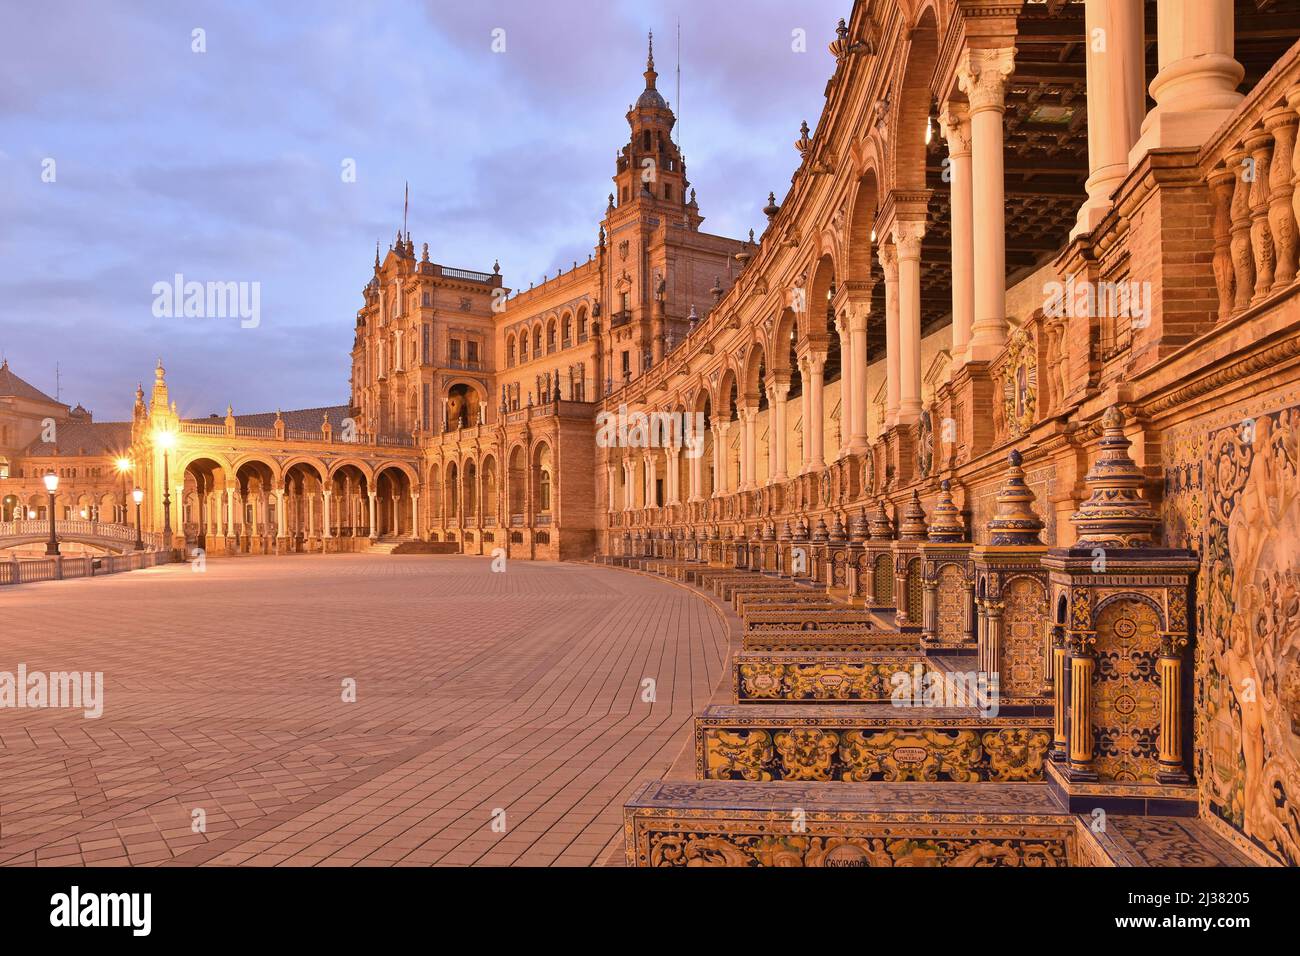 Plaza De Espana - Baroque, Renaissance and Moorish Revival styles architecture at dawn. Located at Maria Luisa Park in Seville Andalusia Spain. Stock Photo